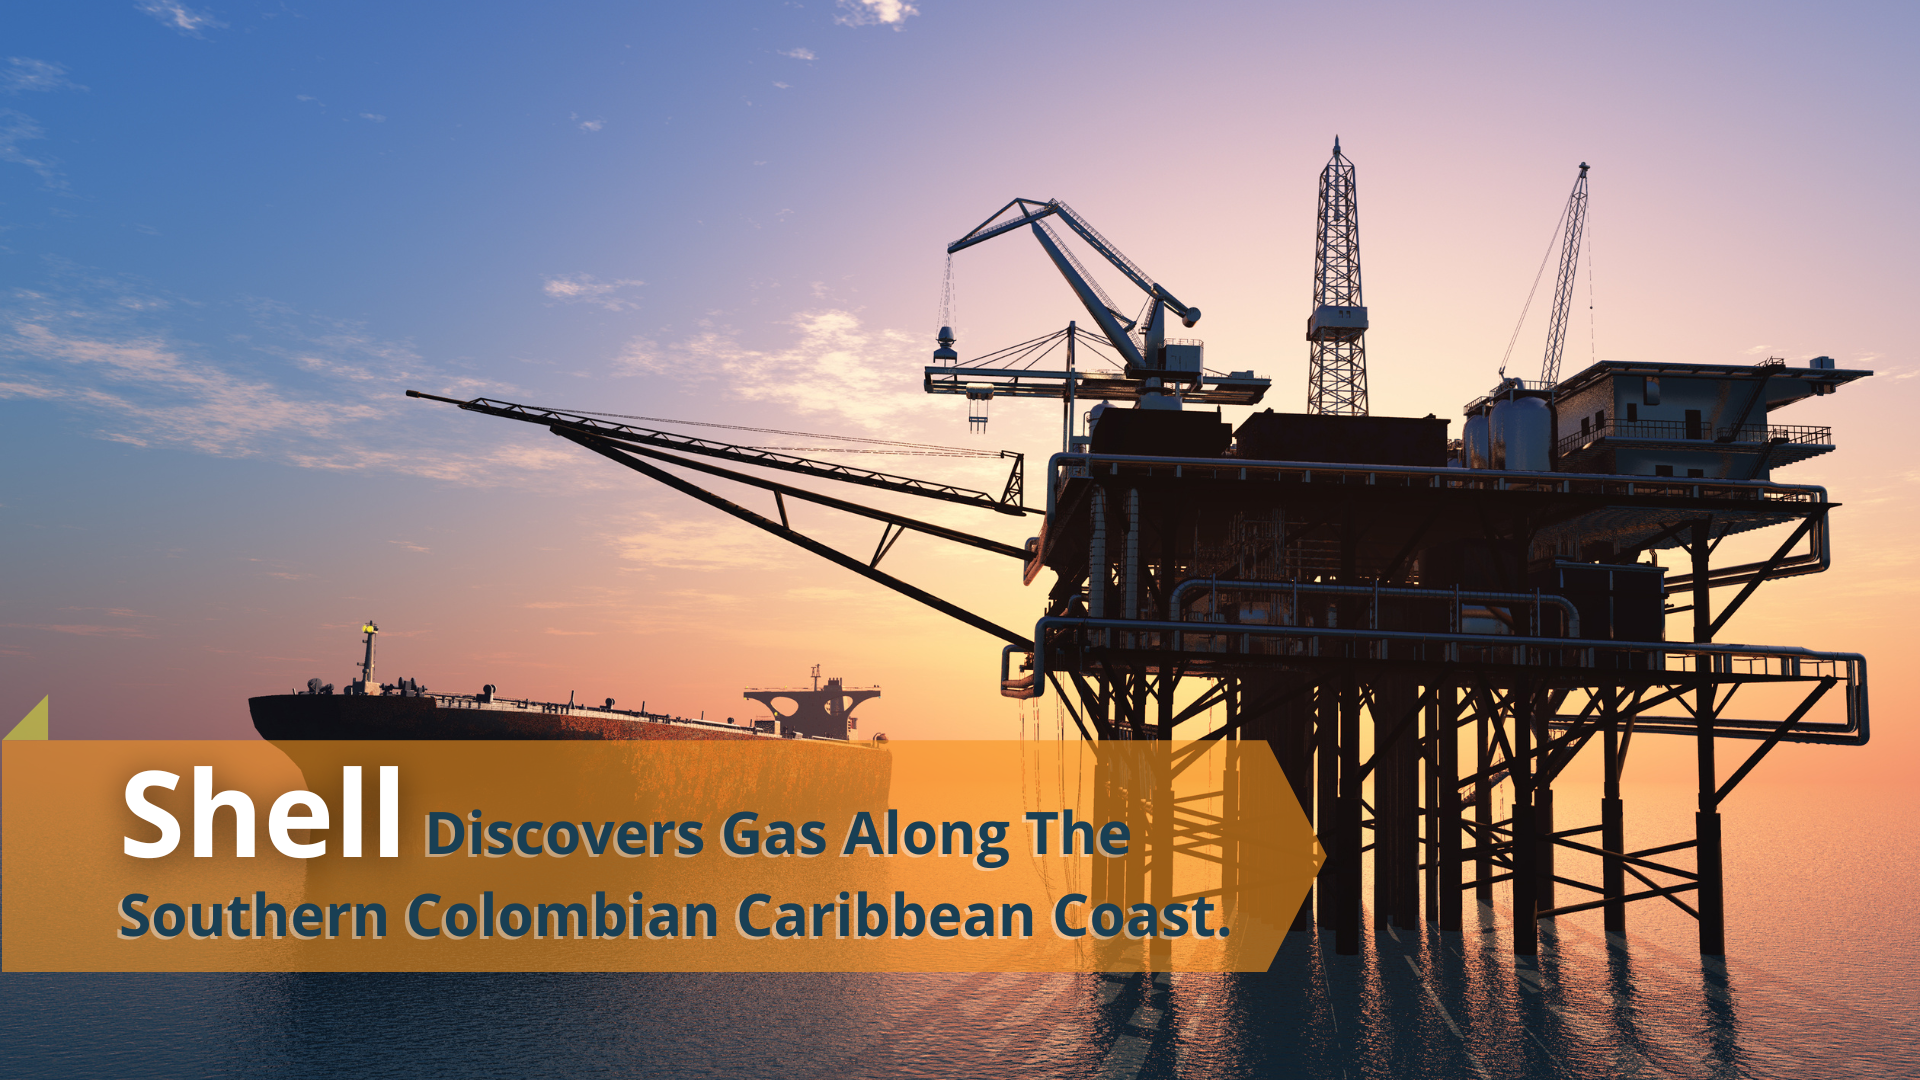 Shell Discovers Gas Along The Southern Colombian Caribbean Coast.